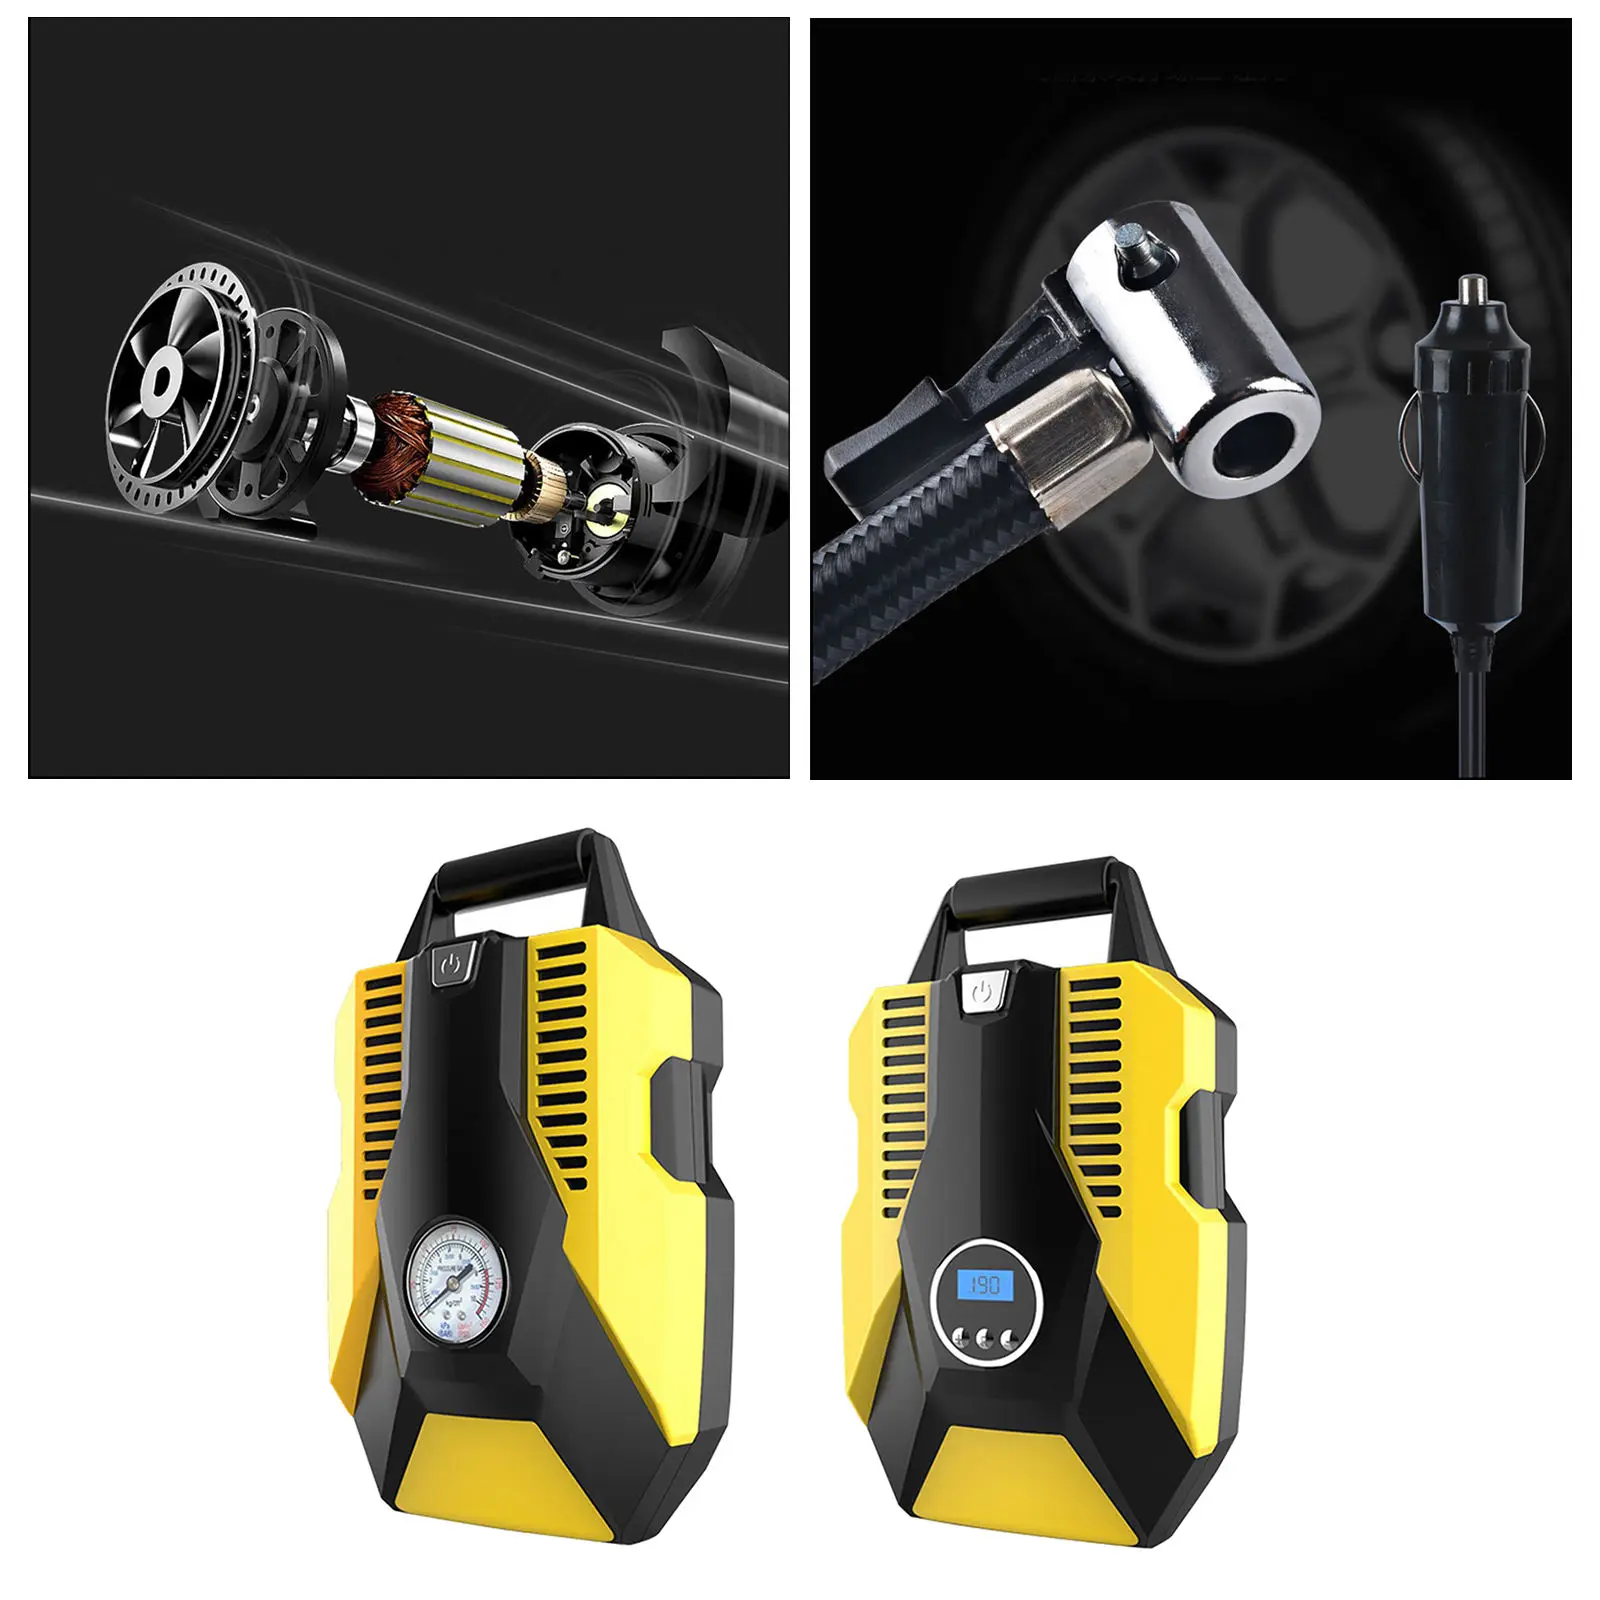 Tyre Inflator, 12V 150PSI Digital Air Compressor Tyre Pump with Larger Air Flow, 2 Nozzle Adaptors, Bright LED Light